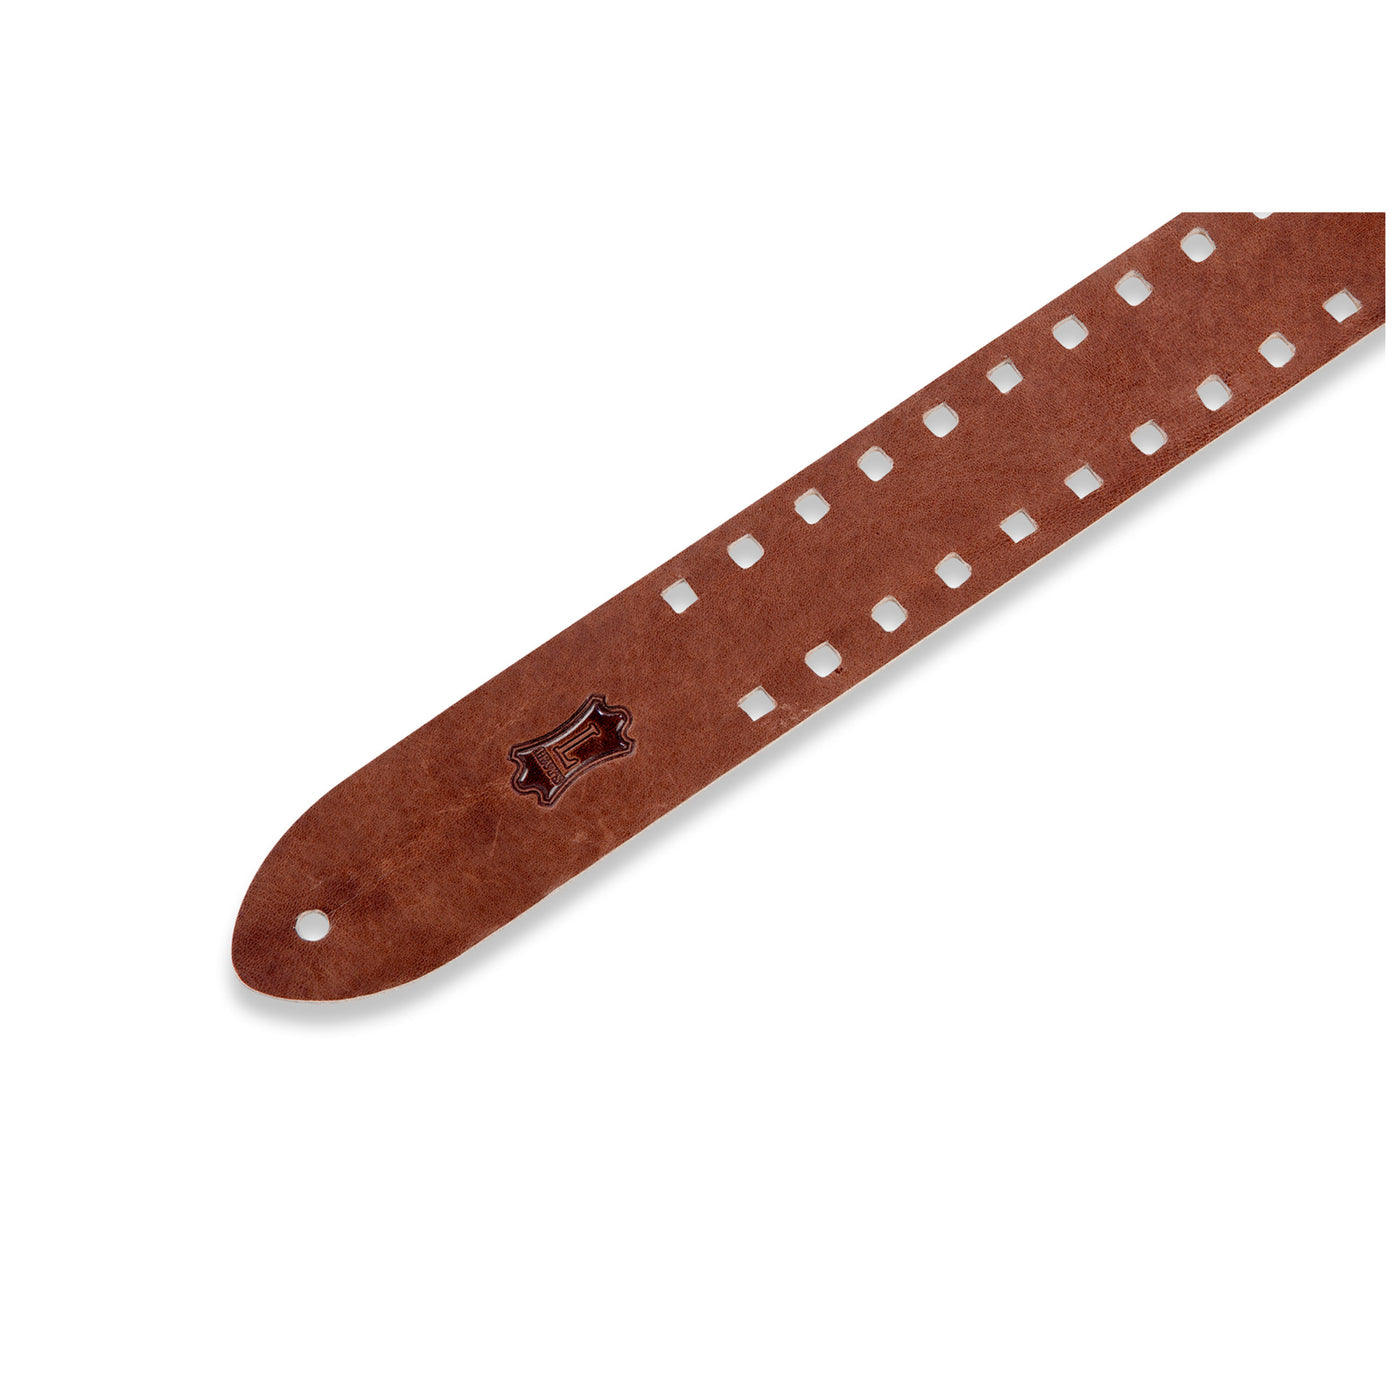 Levy's 2" Square Punch Out Strap in Brown